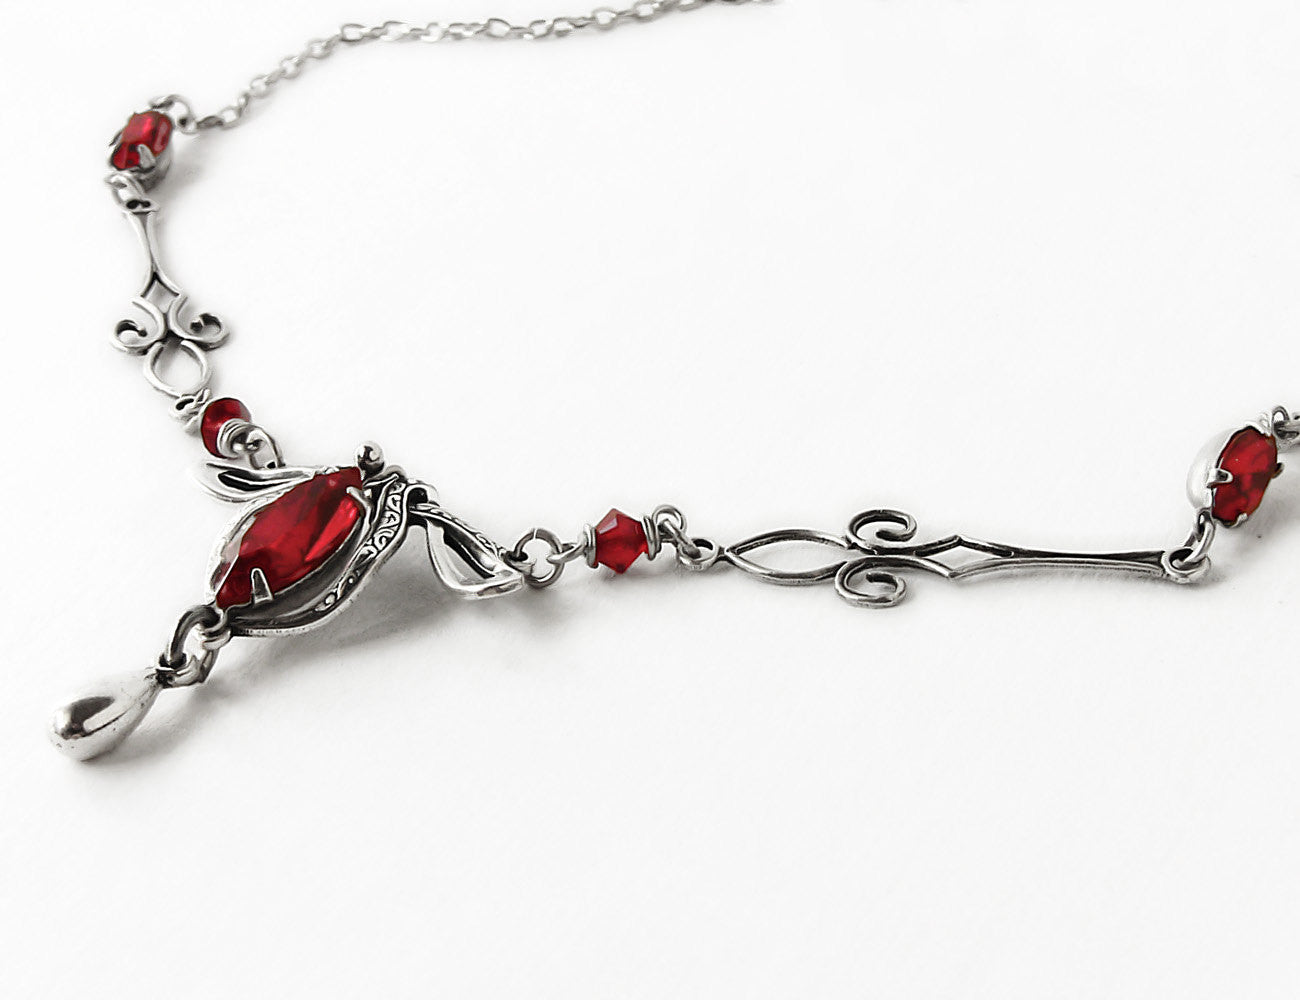 VICTORIAN Body Chain - Red Scarlet and Gunmetal - Criscara